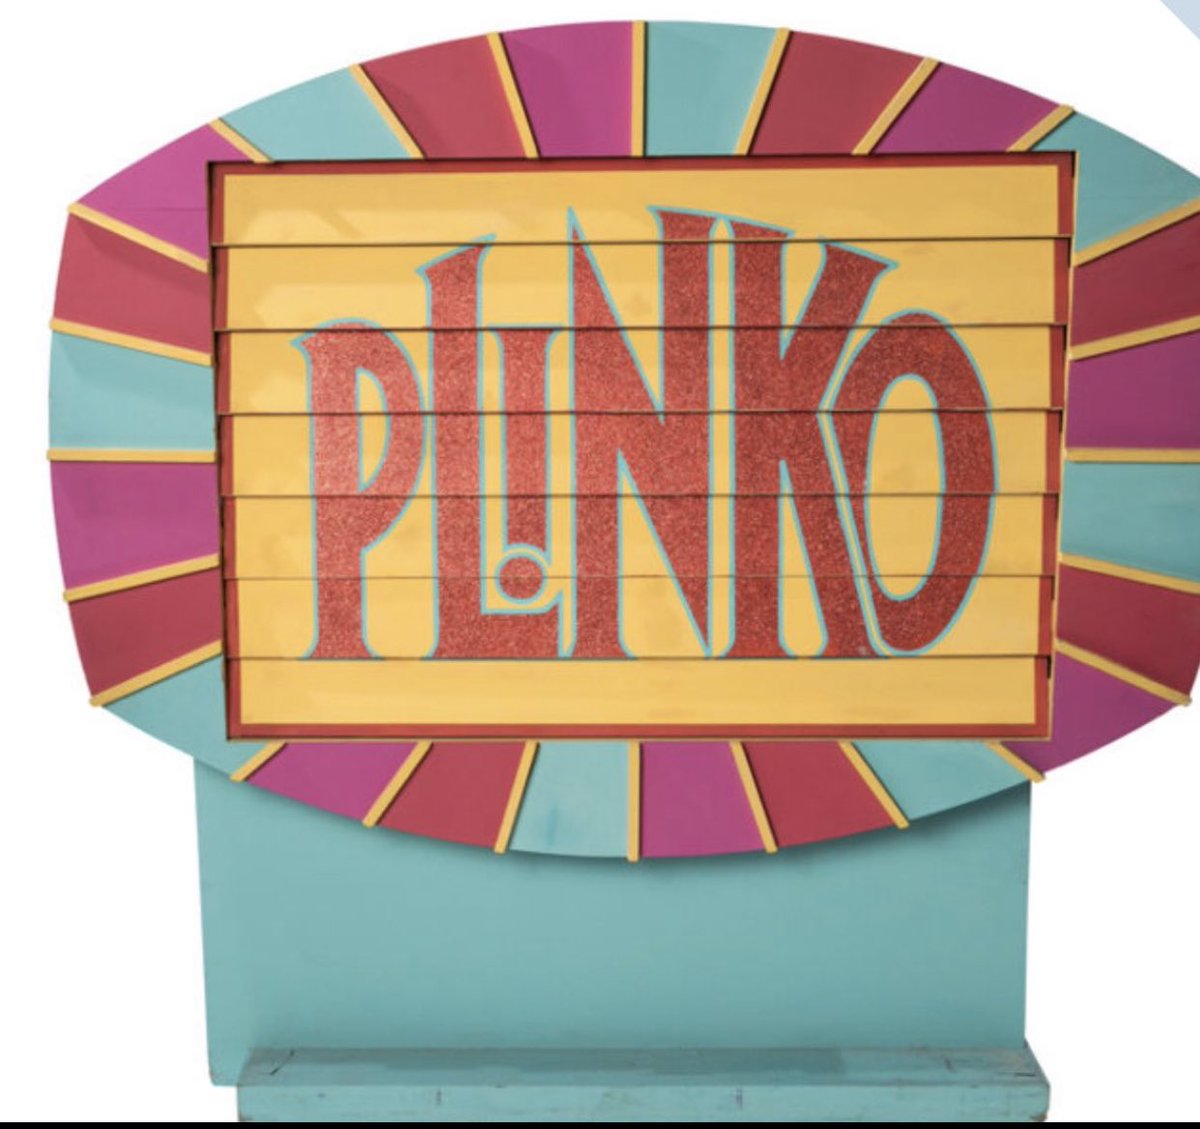 A later version of the Plinko board sold for $21K this year.